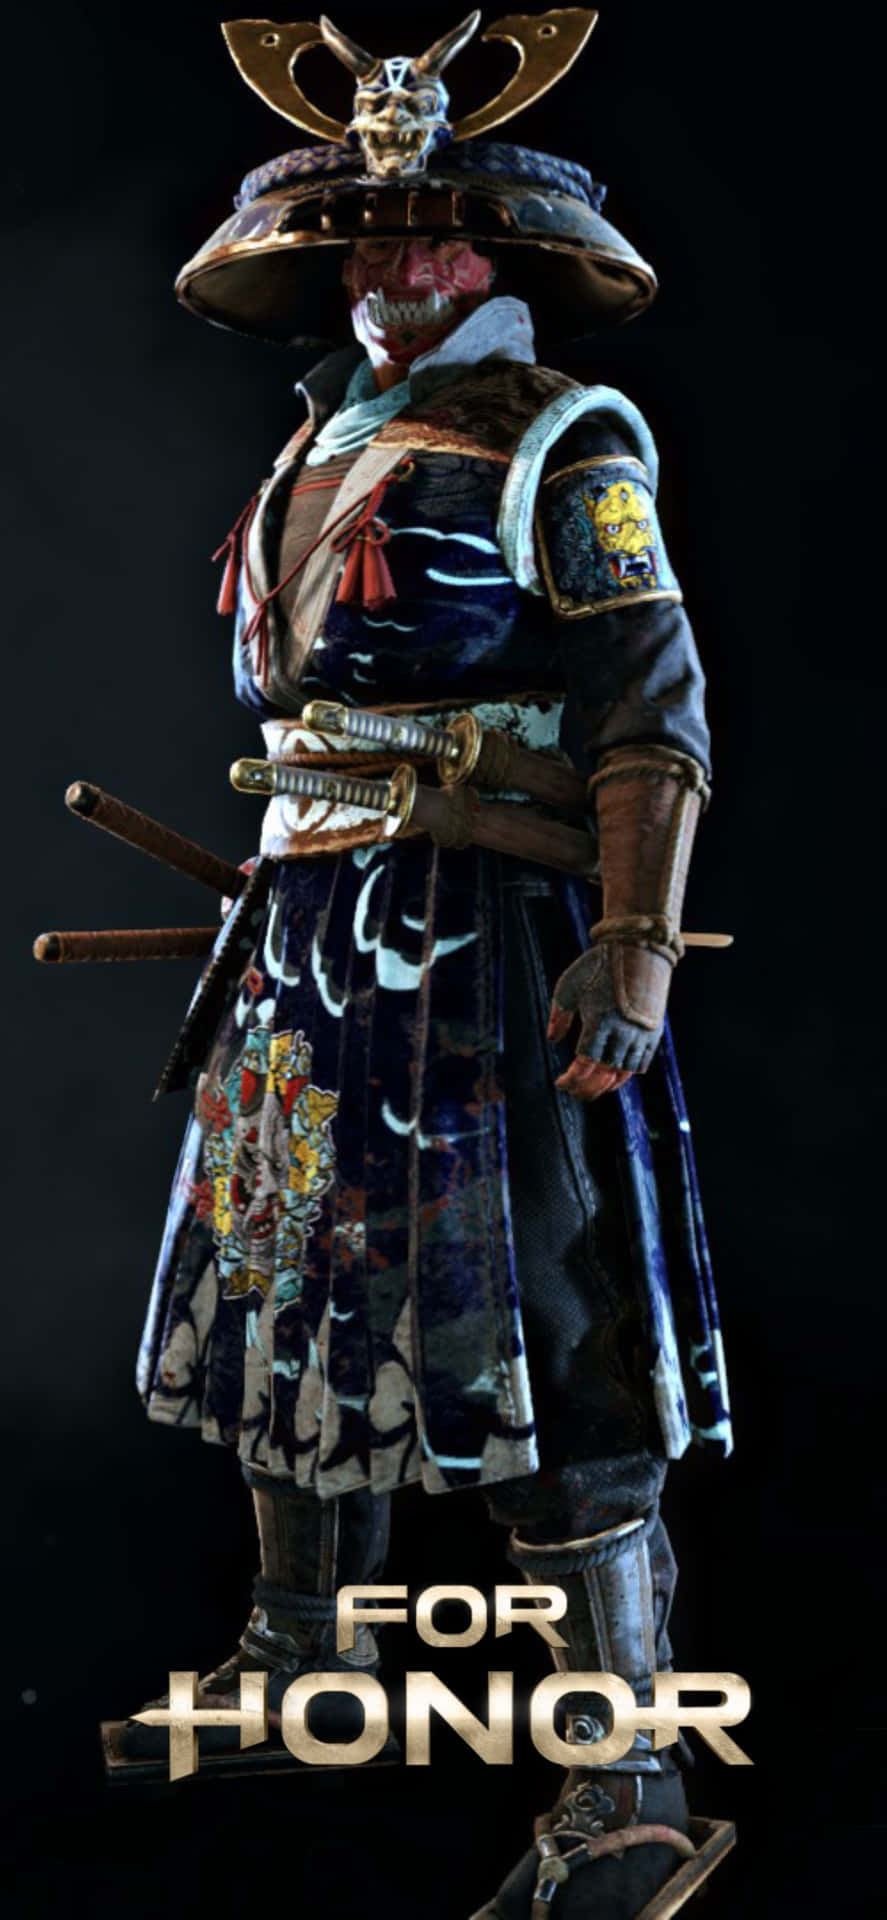 A Man In A Samurai Costume With The Words For Honor